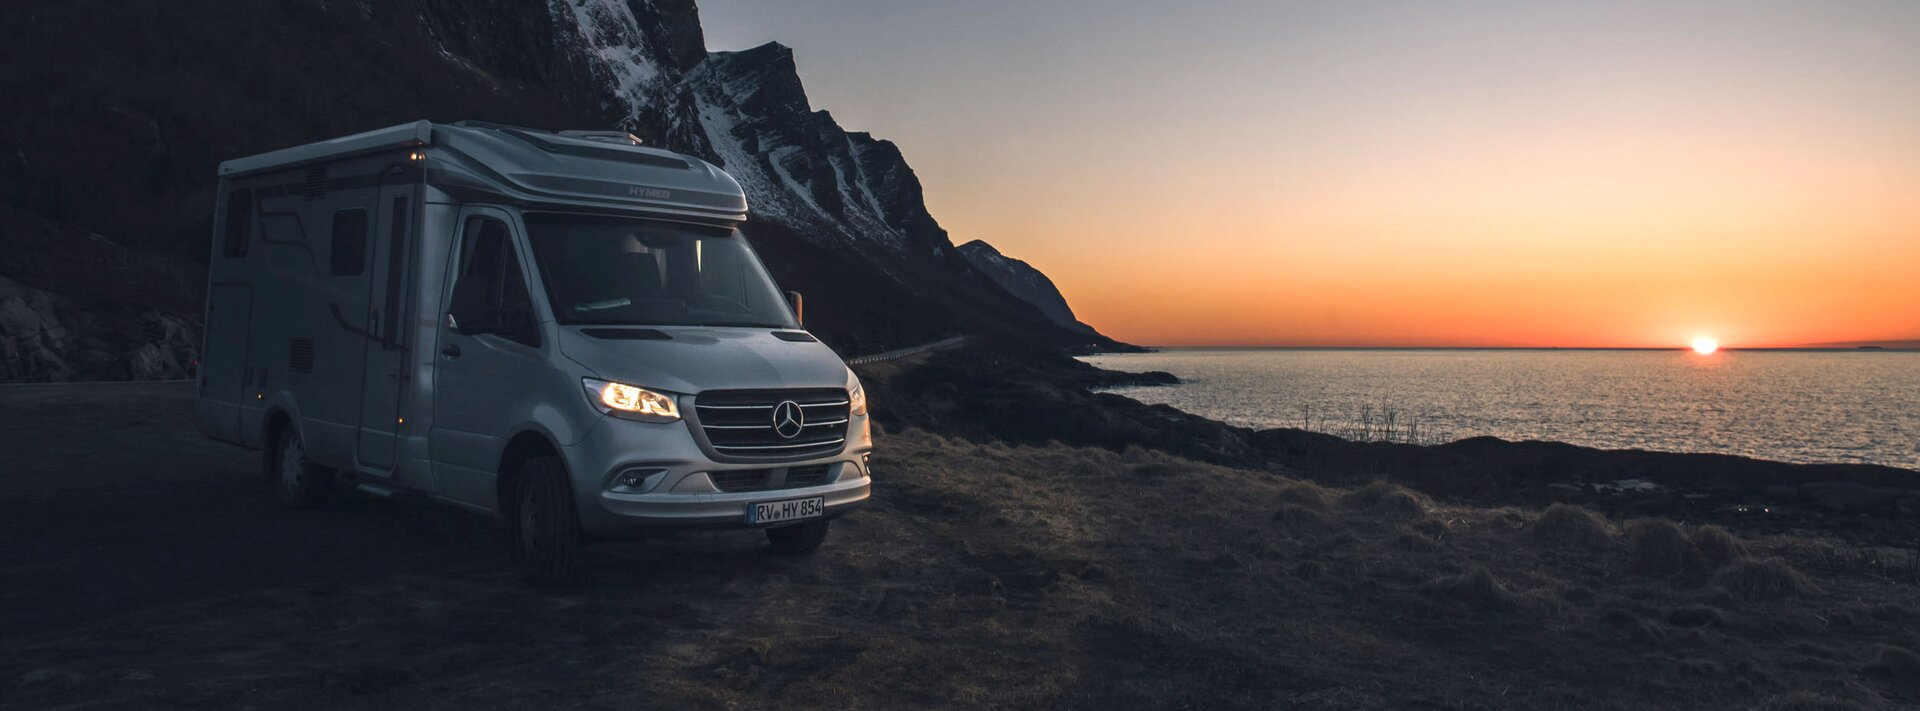 Semi-integrated HYMER motorhome based on Mercedes at sunset on the beach with cliffs